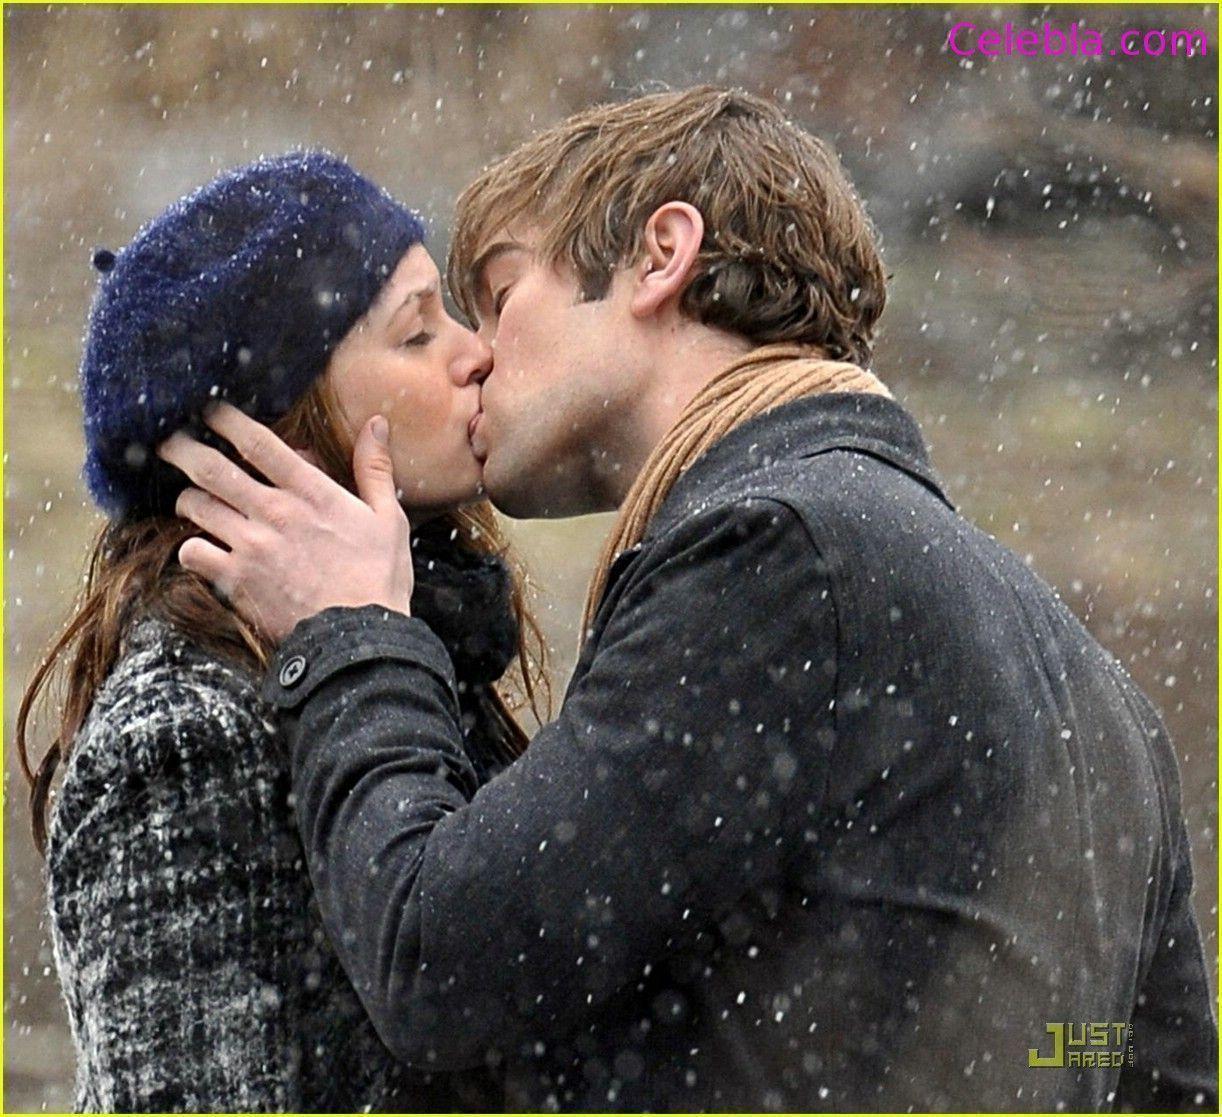 image For > Romantic Kissing Couples Wallpaper